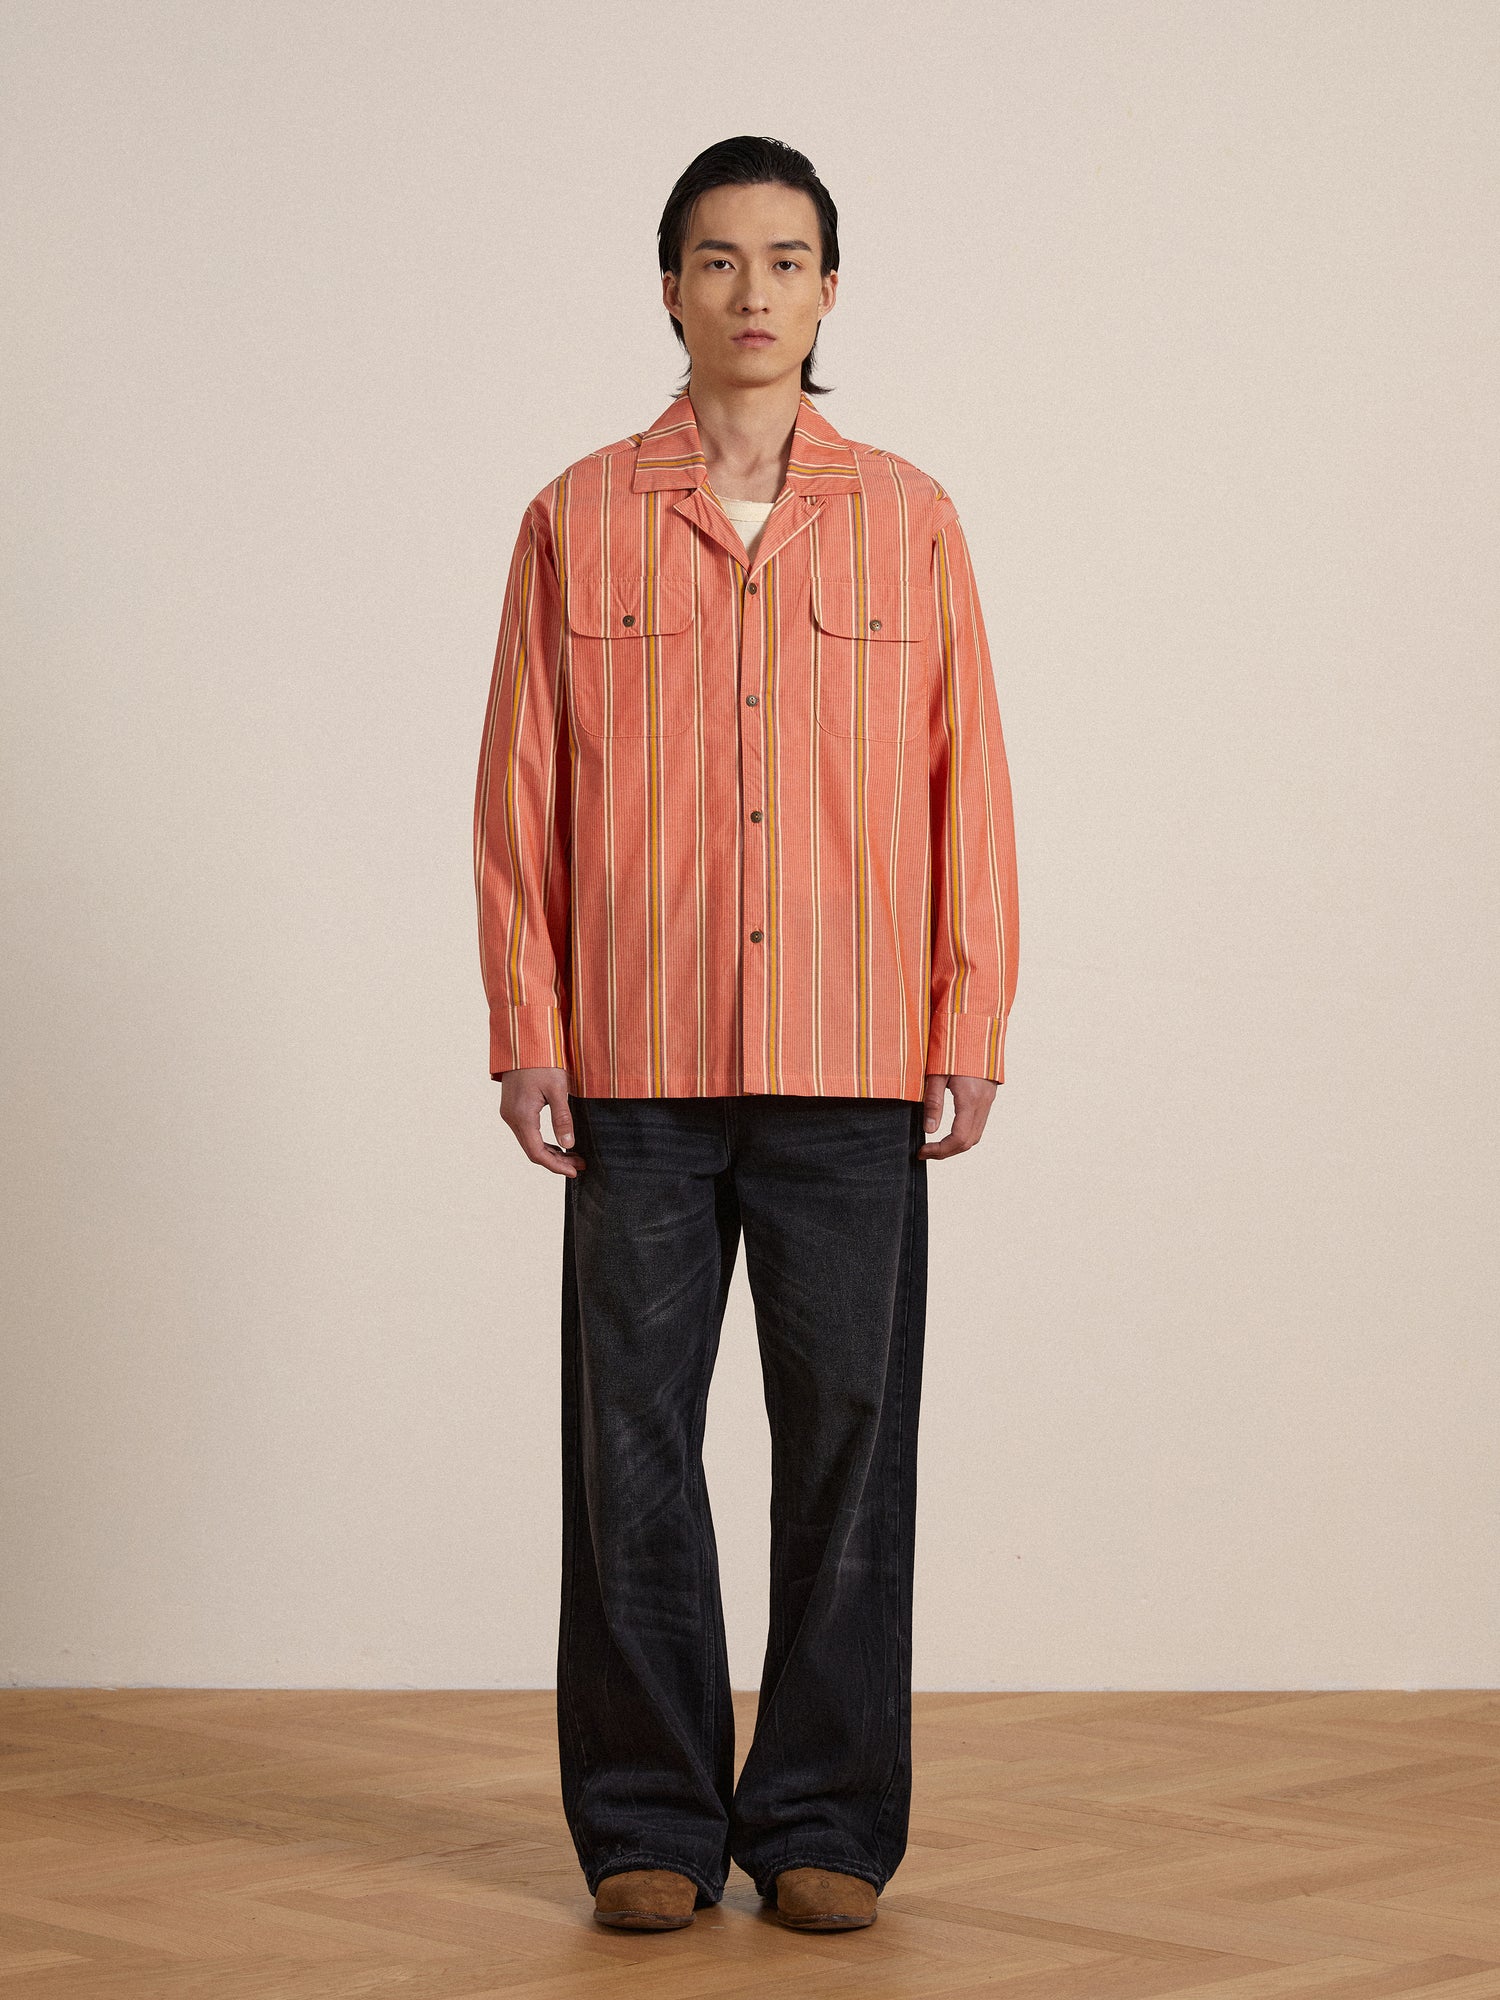 A man in a classic appeal Found Stripe Citrus LS Camp Shirt standing on a wooden floor.